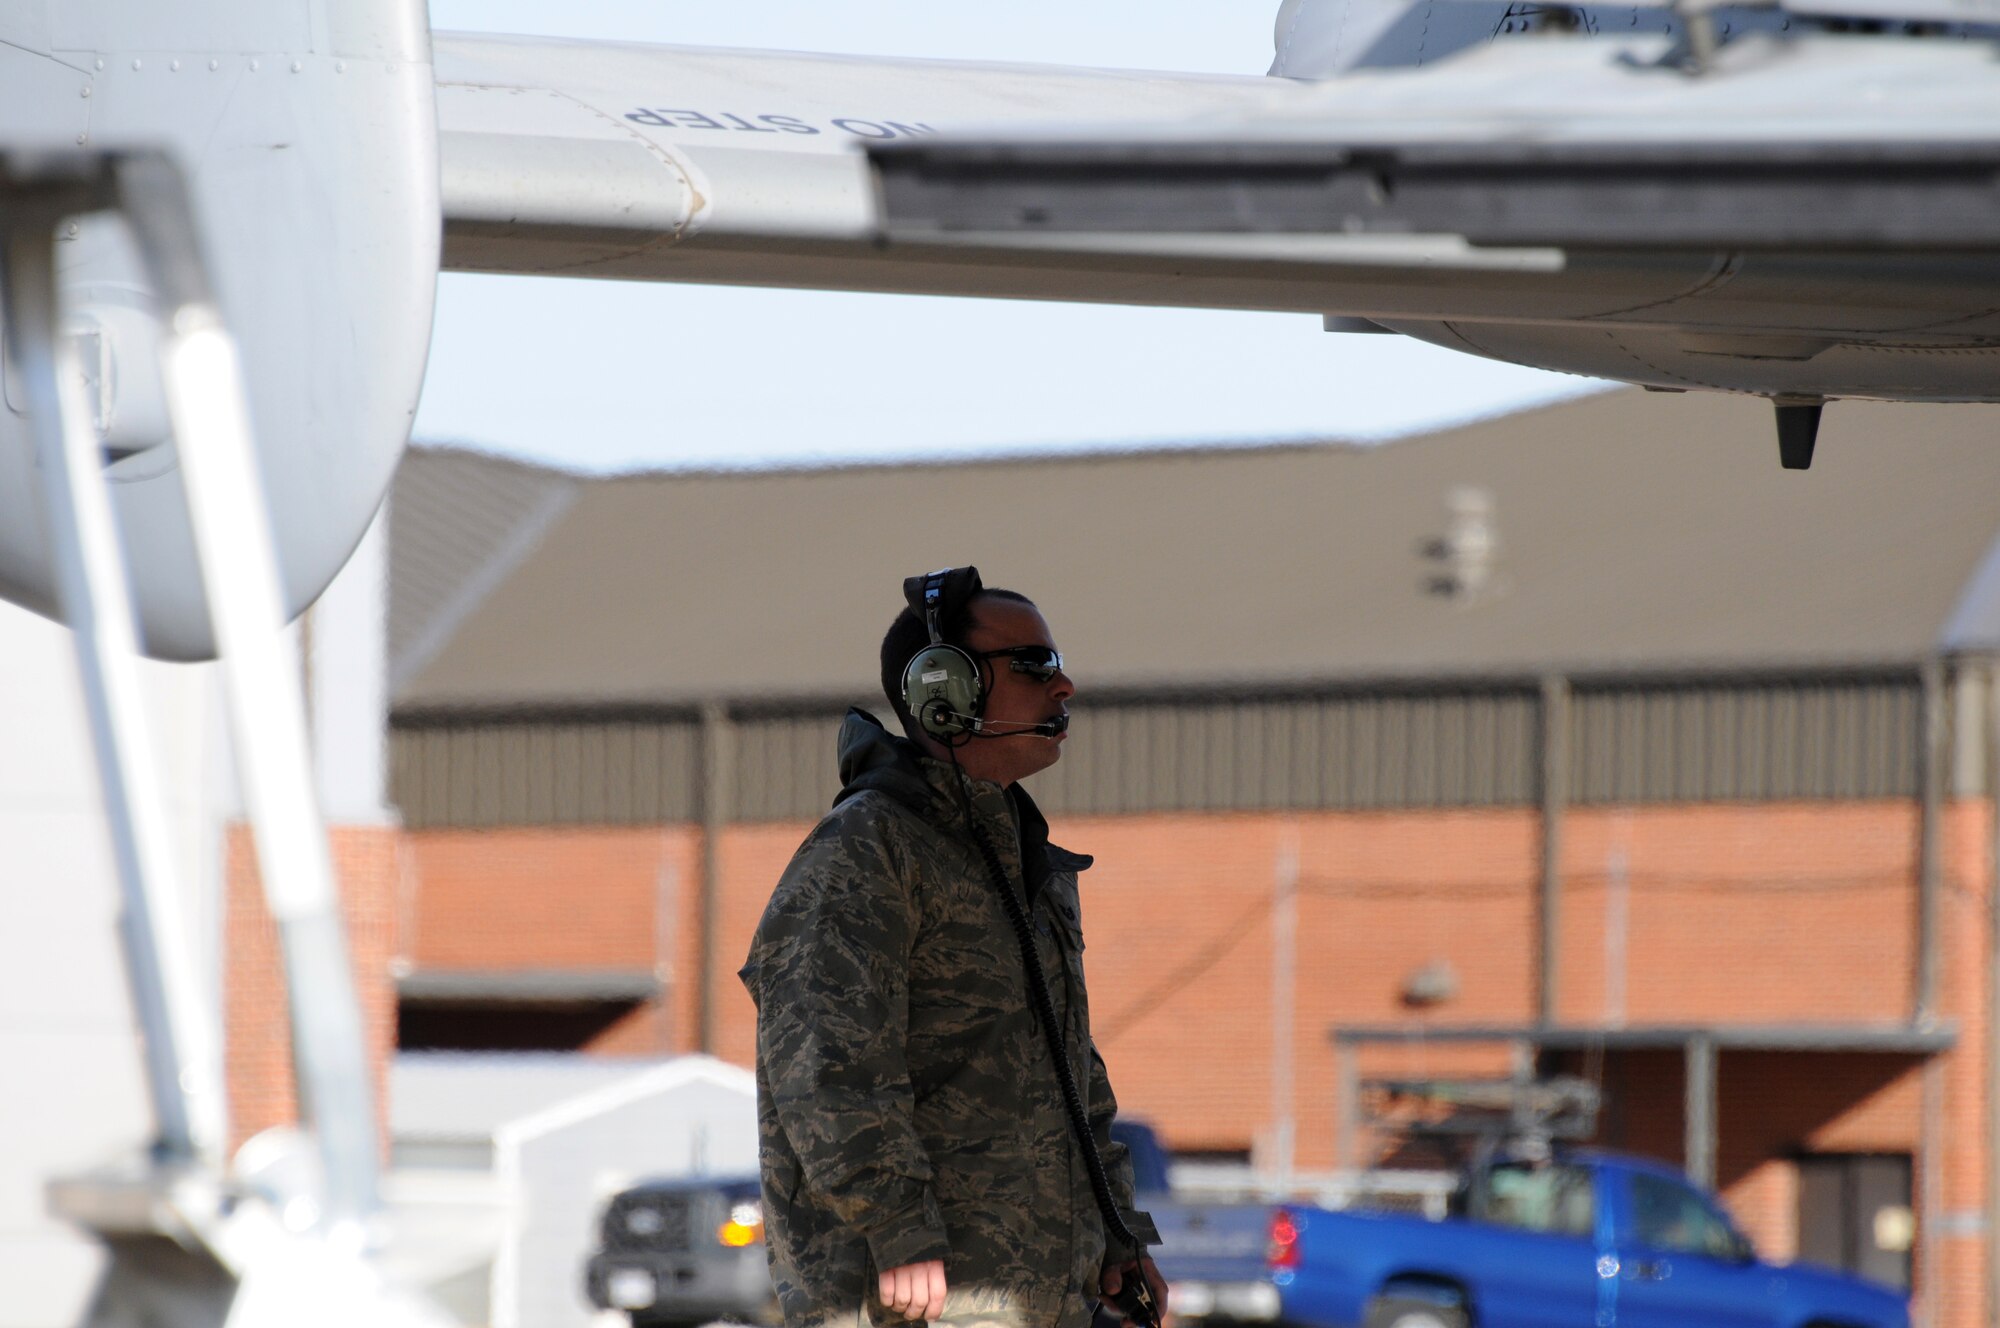 Tech Sgt. Chris Cooper, a crew chief with the 188th Aircraft Maintenance Squadron, preps an A-10C Thunderbolt II "Warthog" (Tail No. 0129) for departure to Moody Air Force Base, Ga., Jan. 15, 2014. Tail Nos. 0129 and 0647 were transferred from the 188th Fighter Wing’s Ebbing Air National Guard Base, Fort Smith, Ark., as part of the wing’s on-going conversion from a fighter mission to remotely piloted aircraft and Intelligence mission, which will include a space-focused targeting squadron. The 188th now has nine remaining A-10s left on station. The A-10s will join Moody AFB’s 75th Fighter Squadron. (U.S. Air National Guard photo by Tech Sgt. Josh Lewis/188th Fighter Wing Public Affairs)